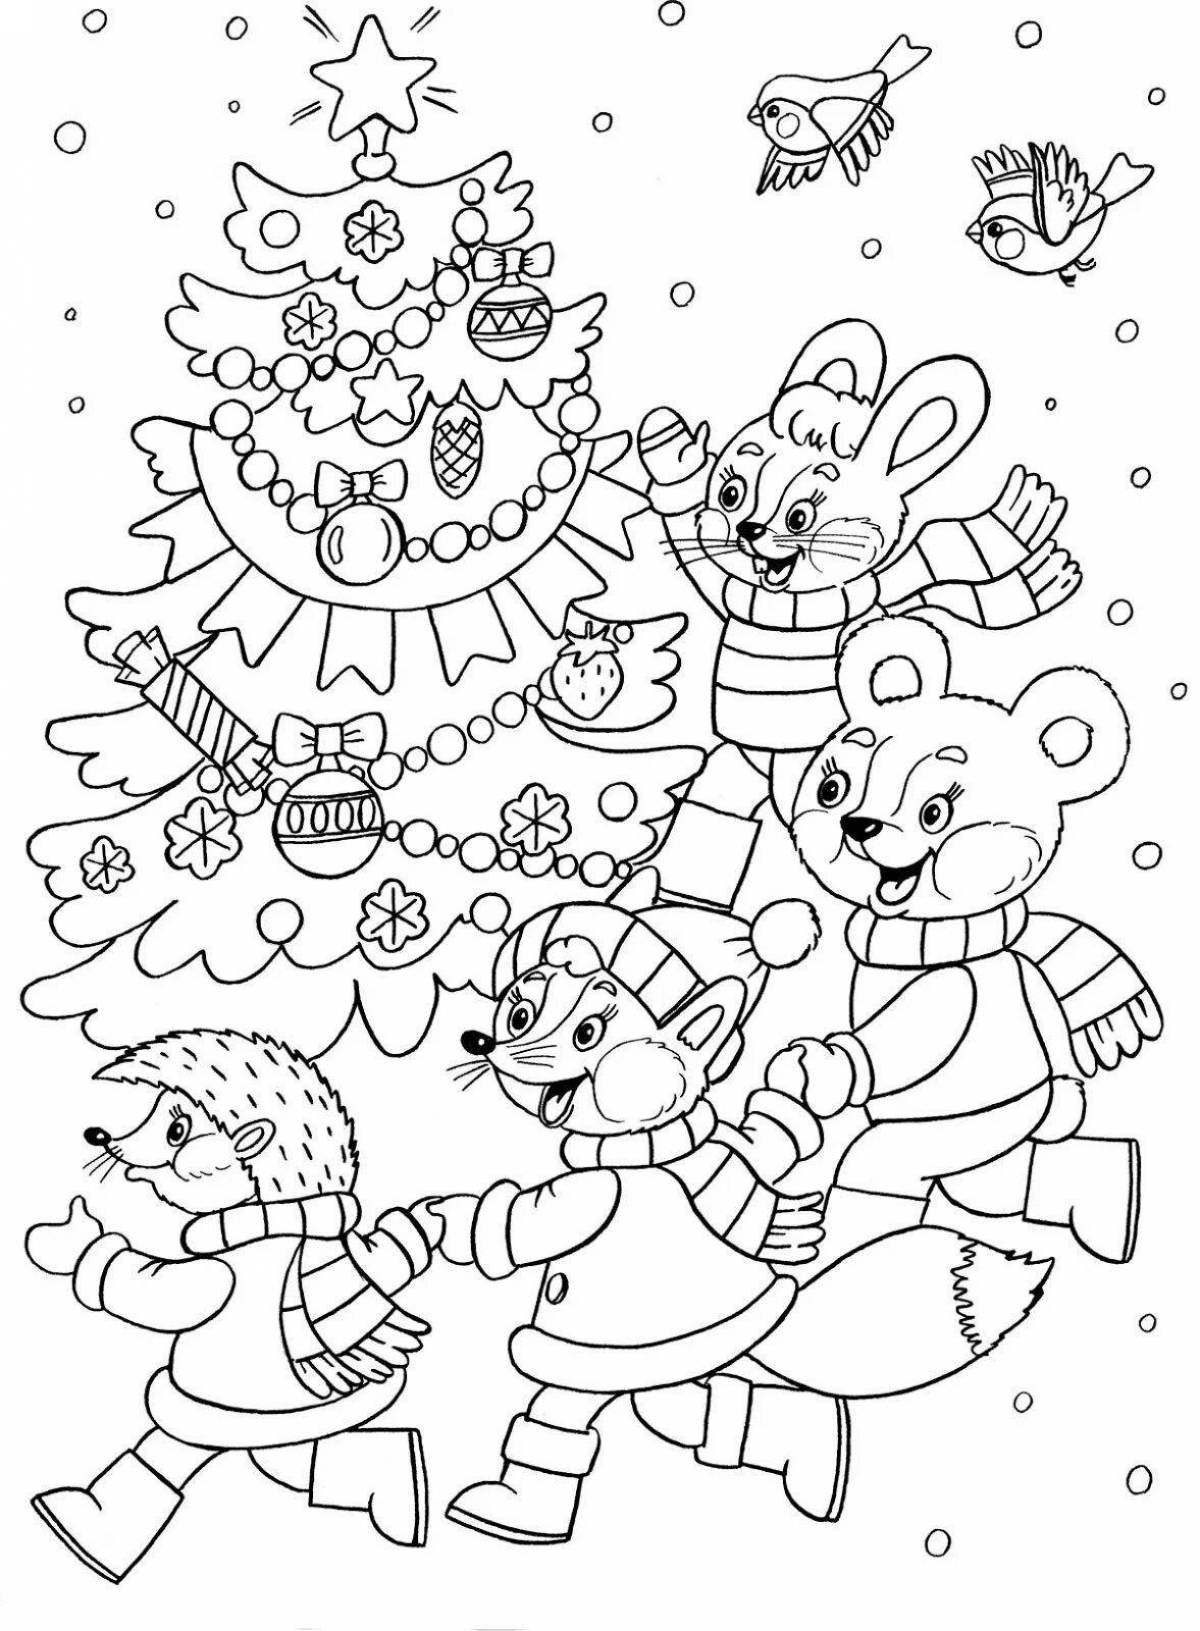 Bright round dance coloring book for preschoolers